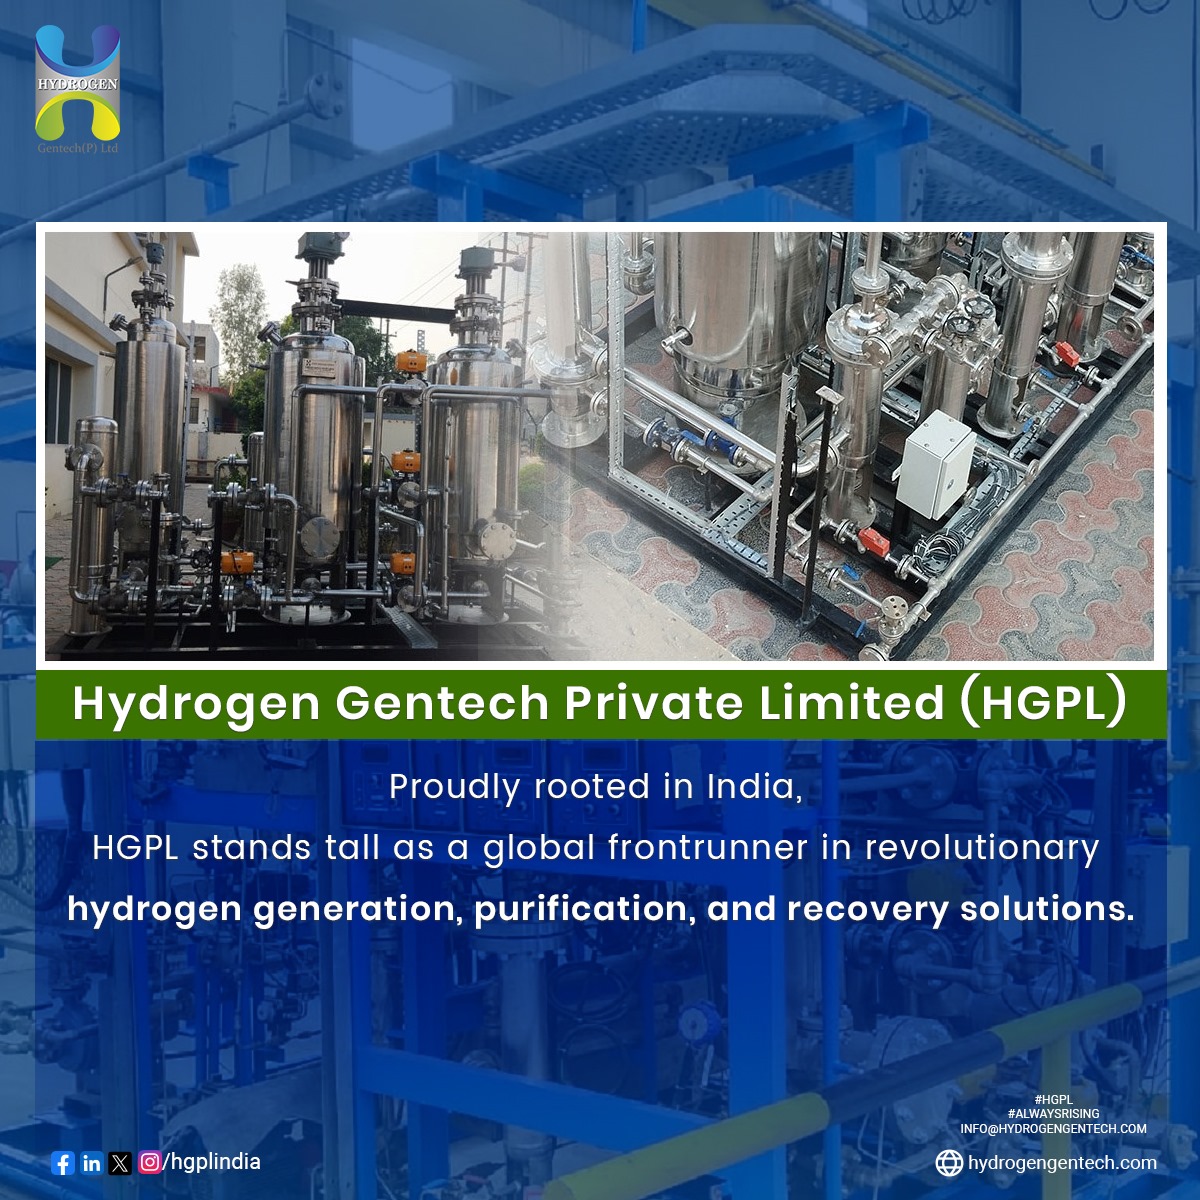 🌟 Hydrogen Gentech Private Limited (HGPL) 🌟 🇮🇳 Proudly rooted in India, HGPL stands tall as a global frontrunner in revolutionary hydrogen generation, purification, and recovery solutions. 💡 #Hydrogen #CleanEnergy #Innovation #Manufacturing #GreenTechnology